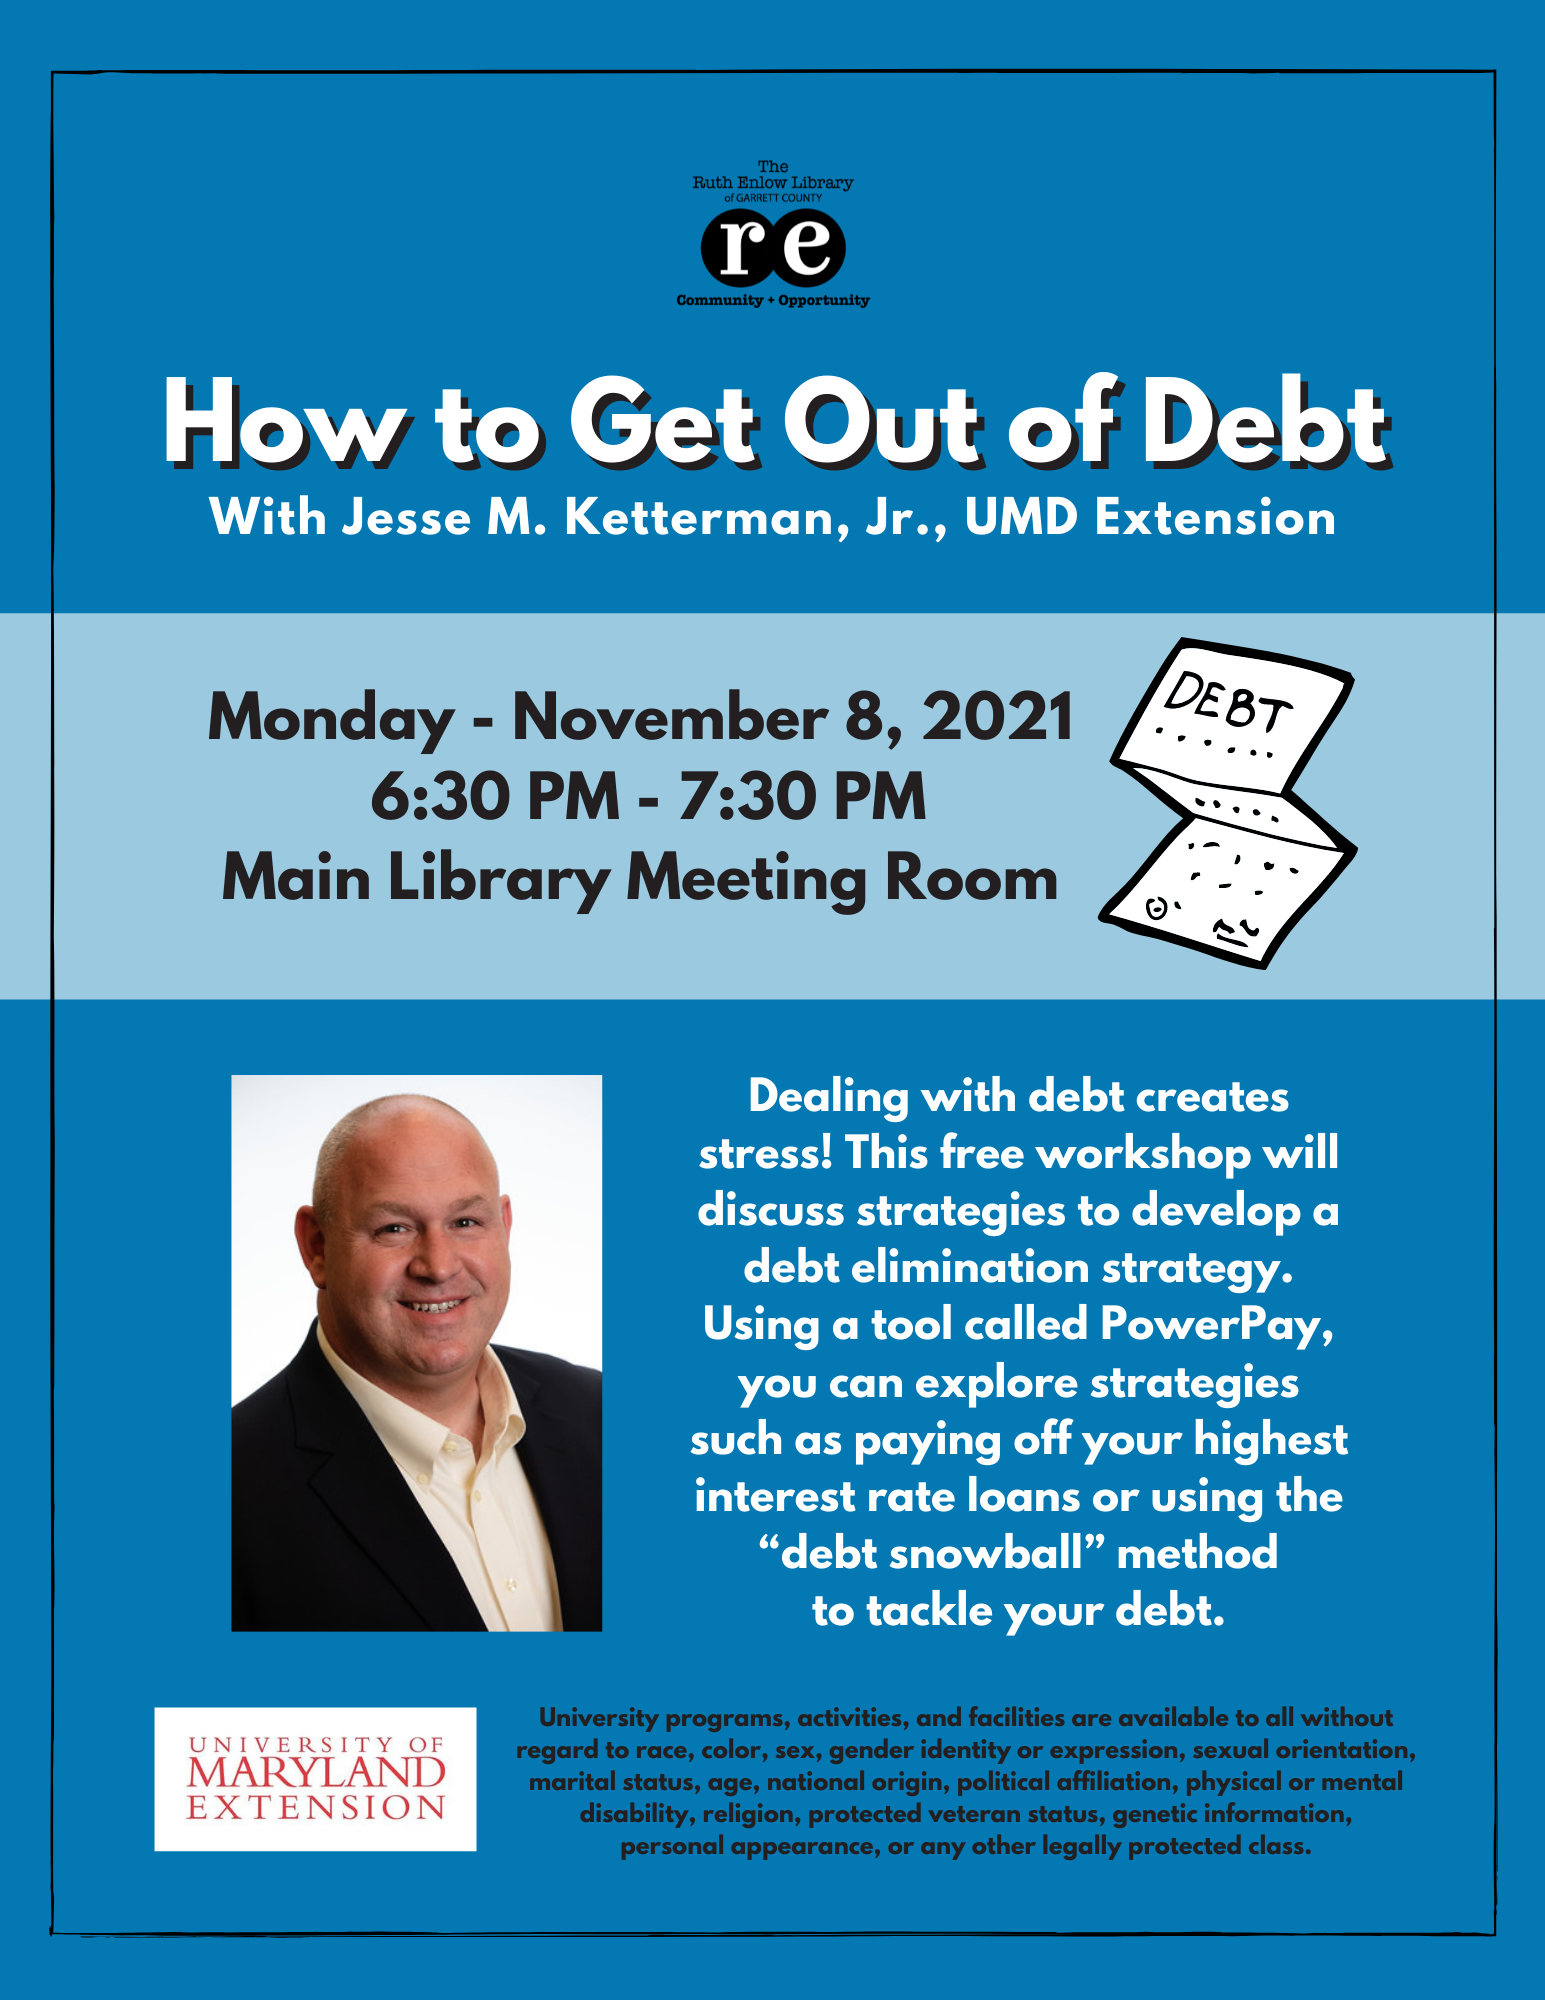 How to Get Out of Debt Workshop